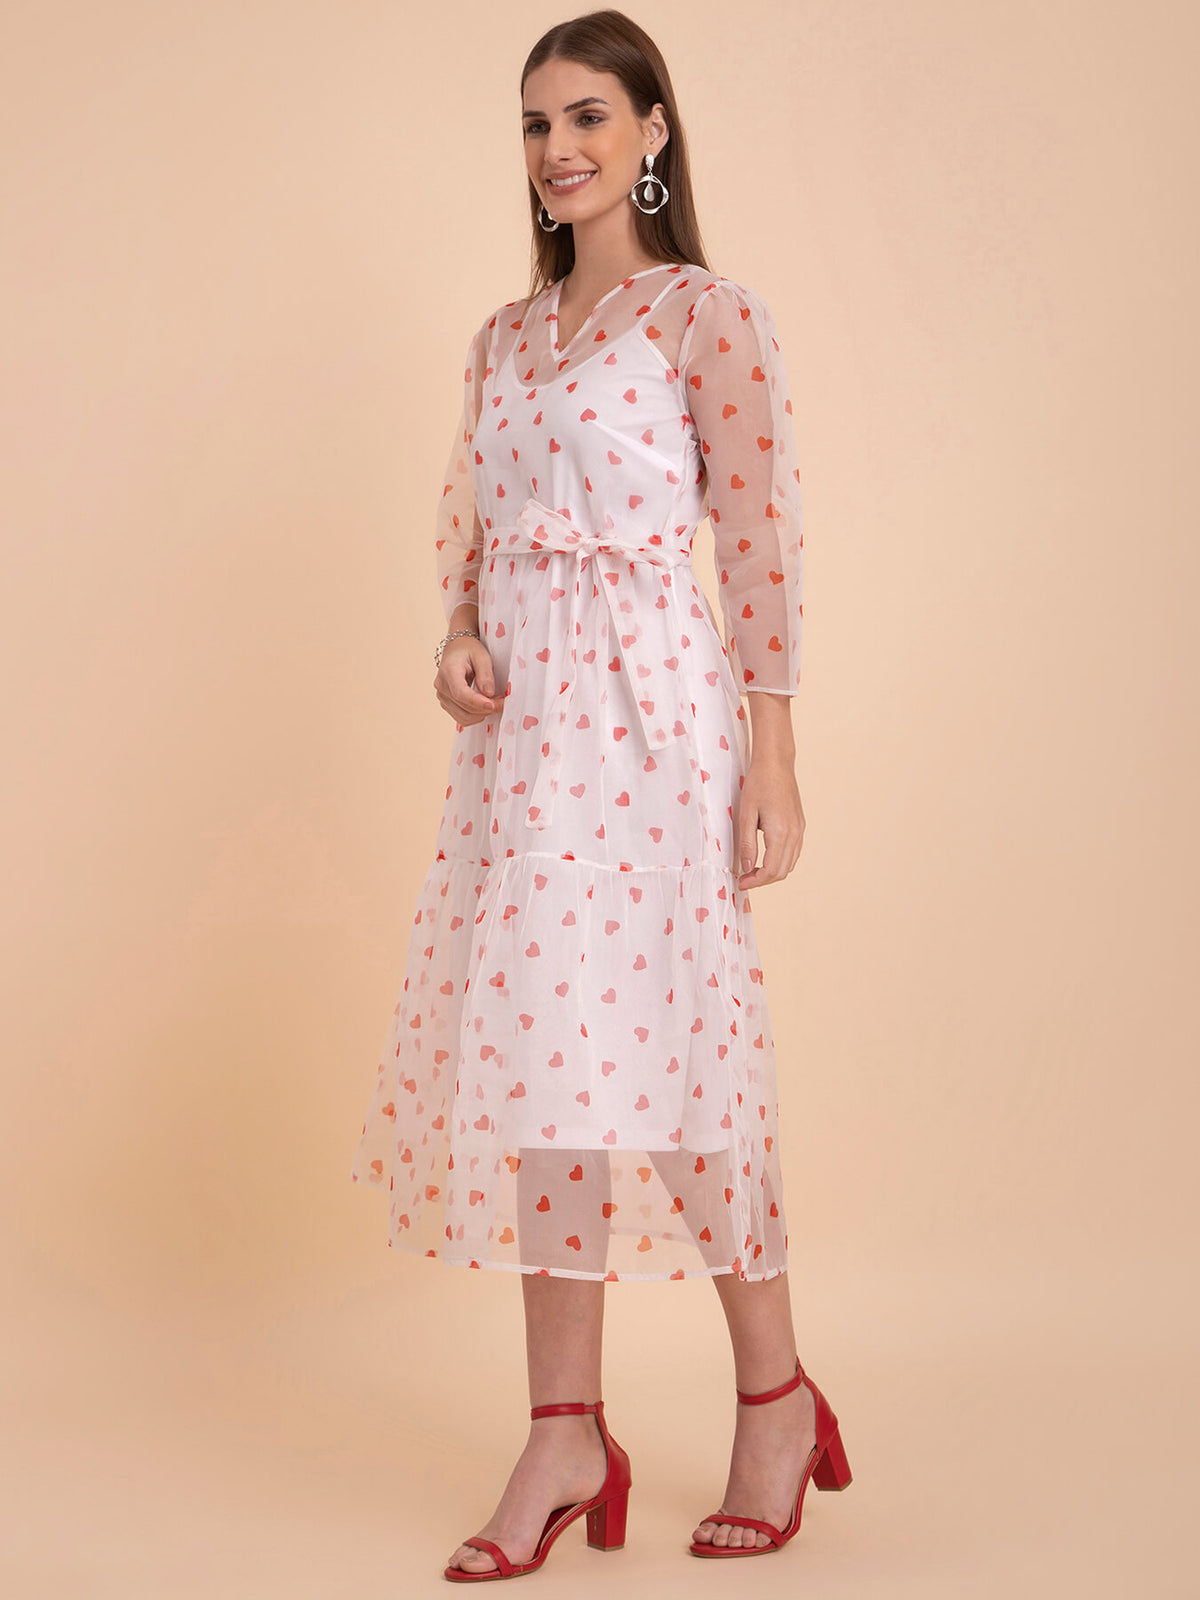 Organza Heart Print Tier Dress - White And Red